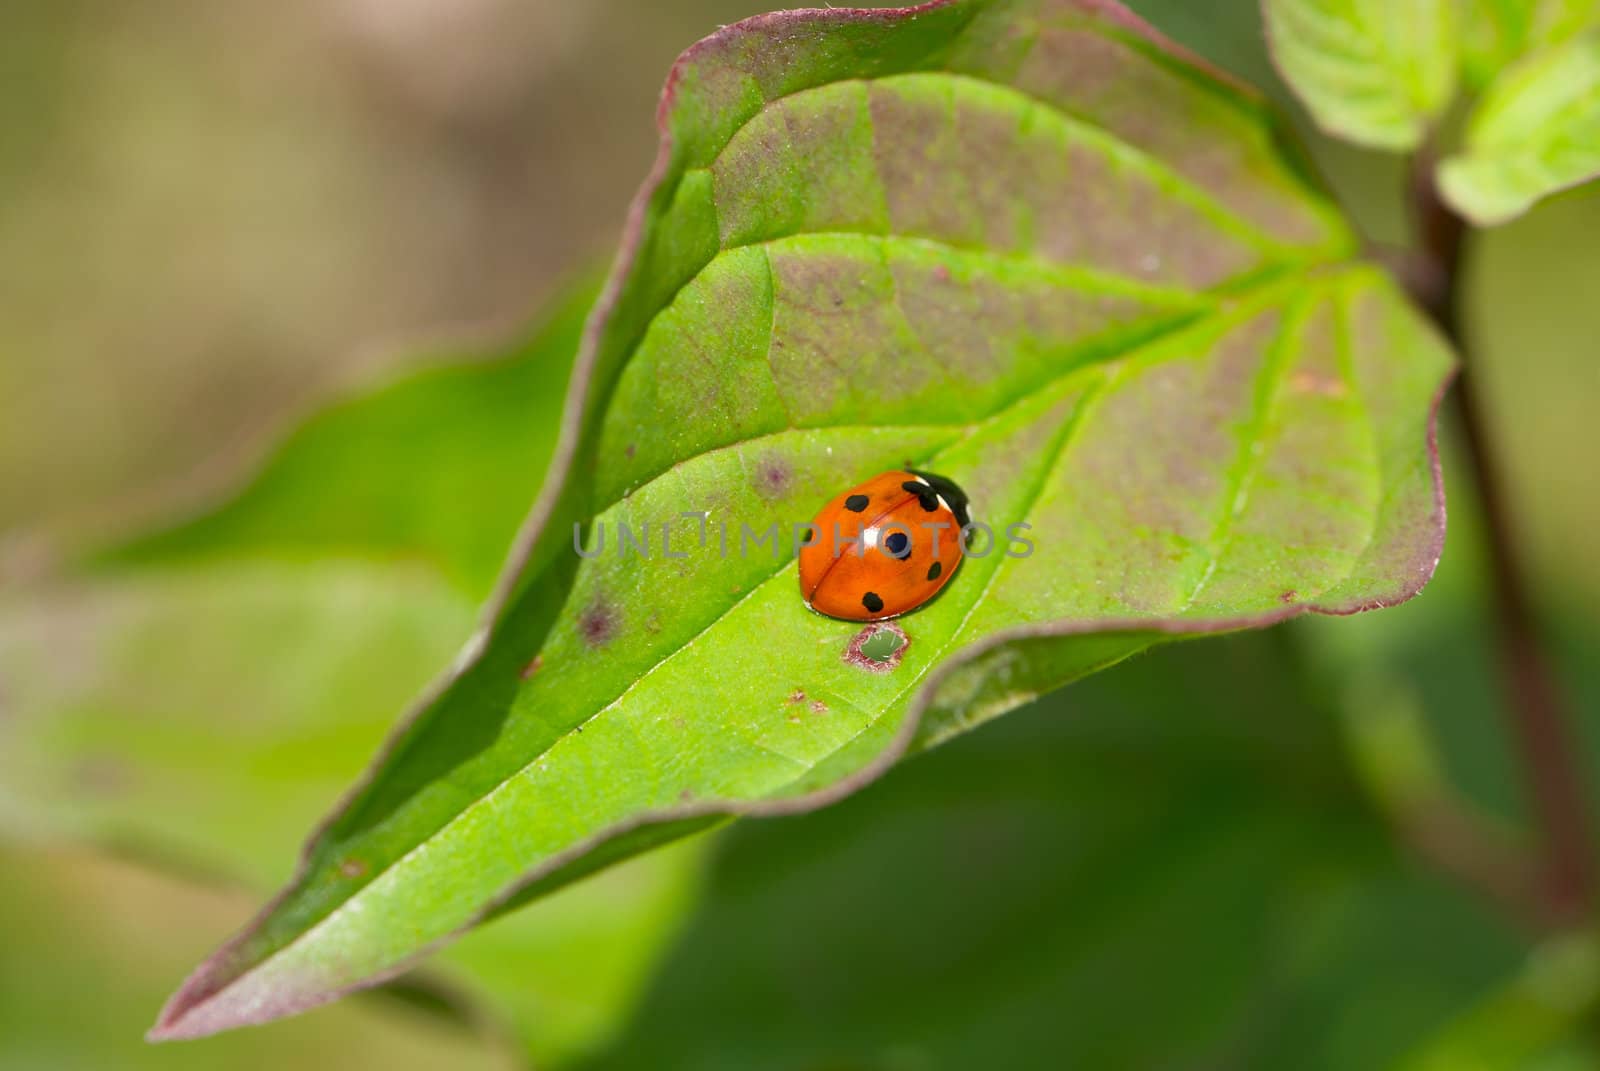 Ladybird beetle (Coccinella septempunctata) on a fly to eat on a leaf